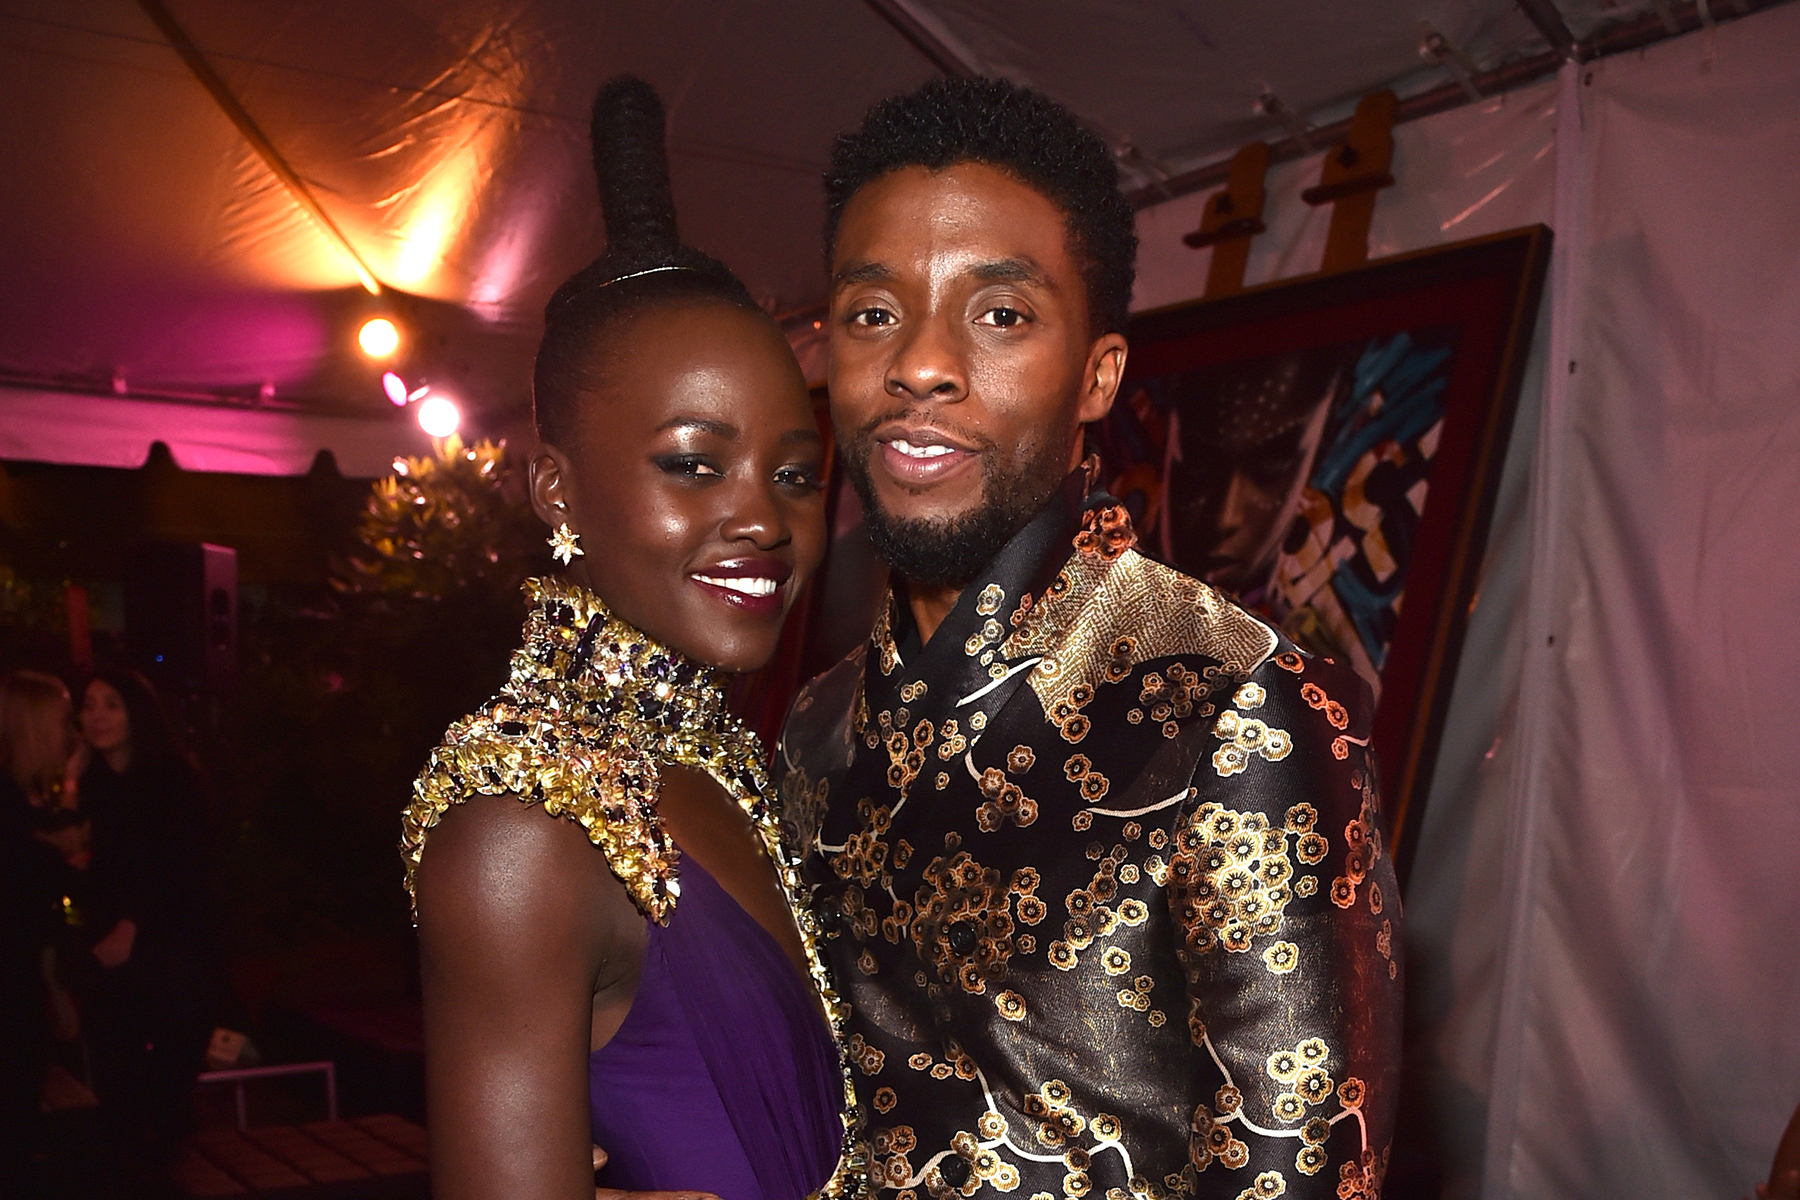 Lupita Nyong’o on Chadwick Boseman: ‘In His Honor, I Promise Not to Waste My Time’